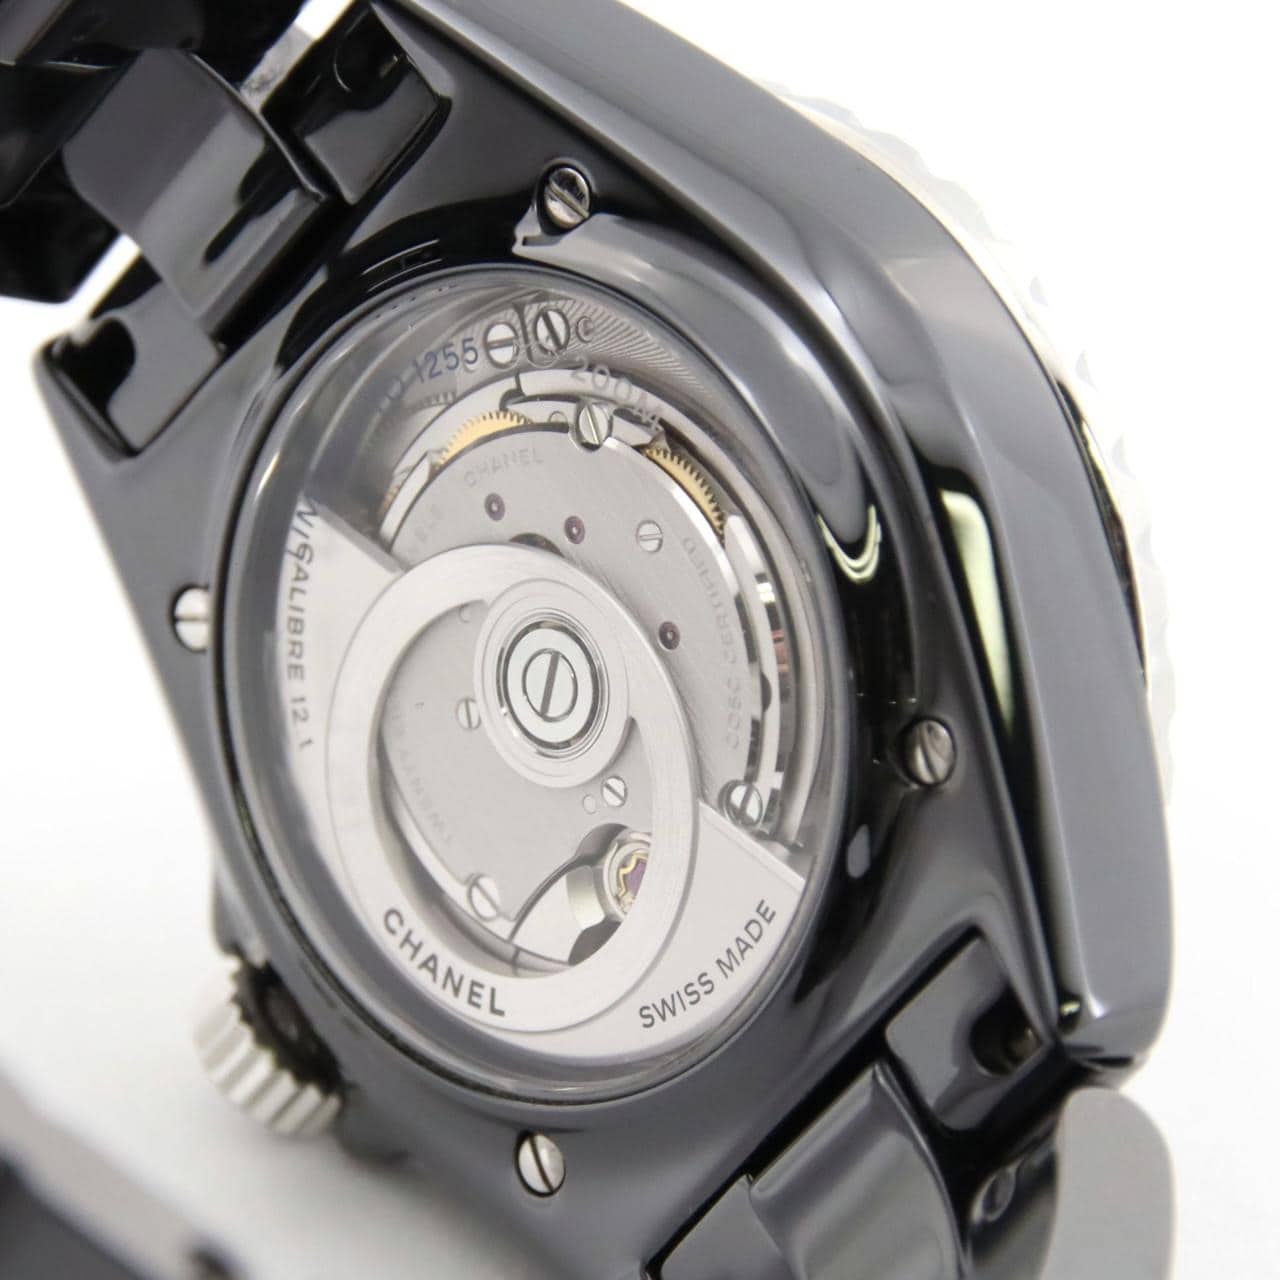 CHANEL J12 Electro Calibre 12.1 LIMITED H7122 陶瓷自动上弦